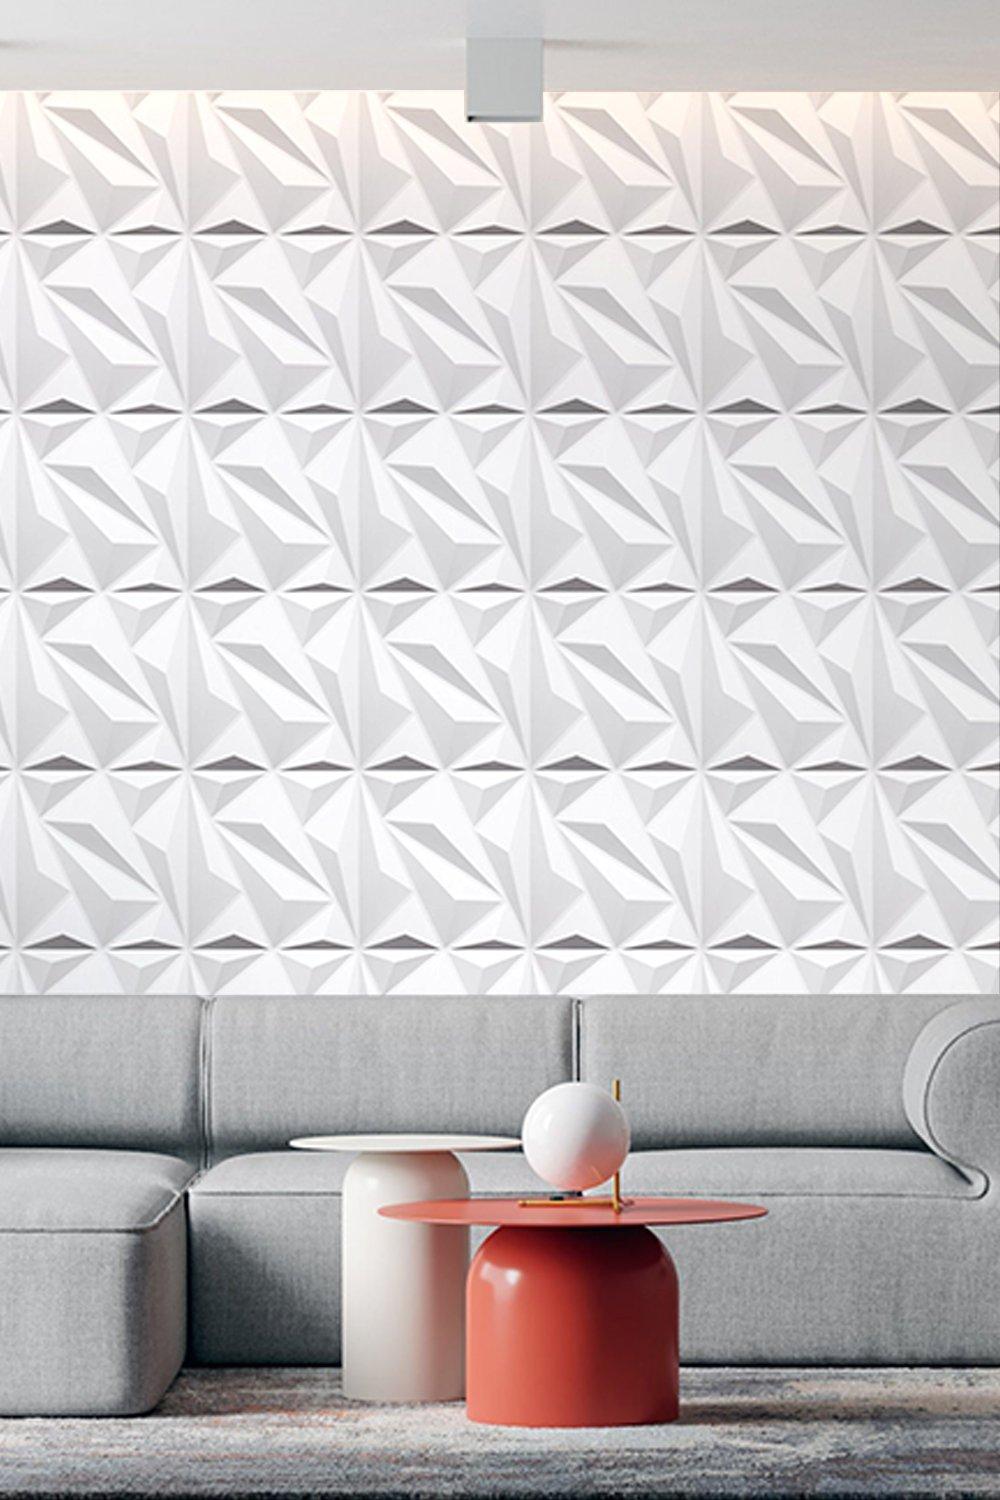 12 Pack PVC 3D Wave Wall Panels